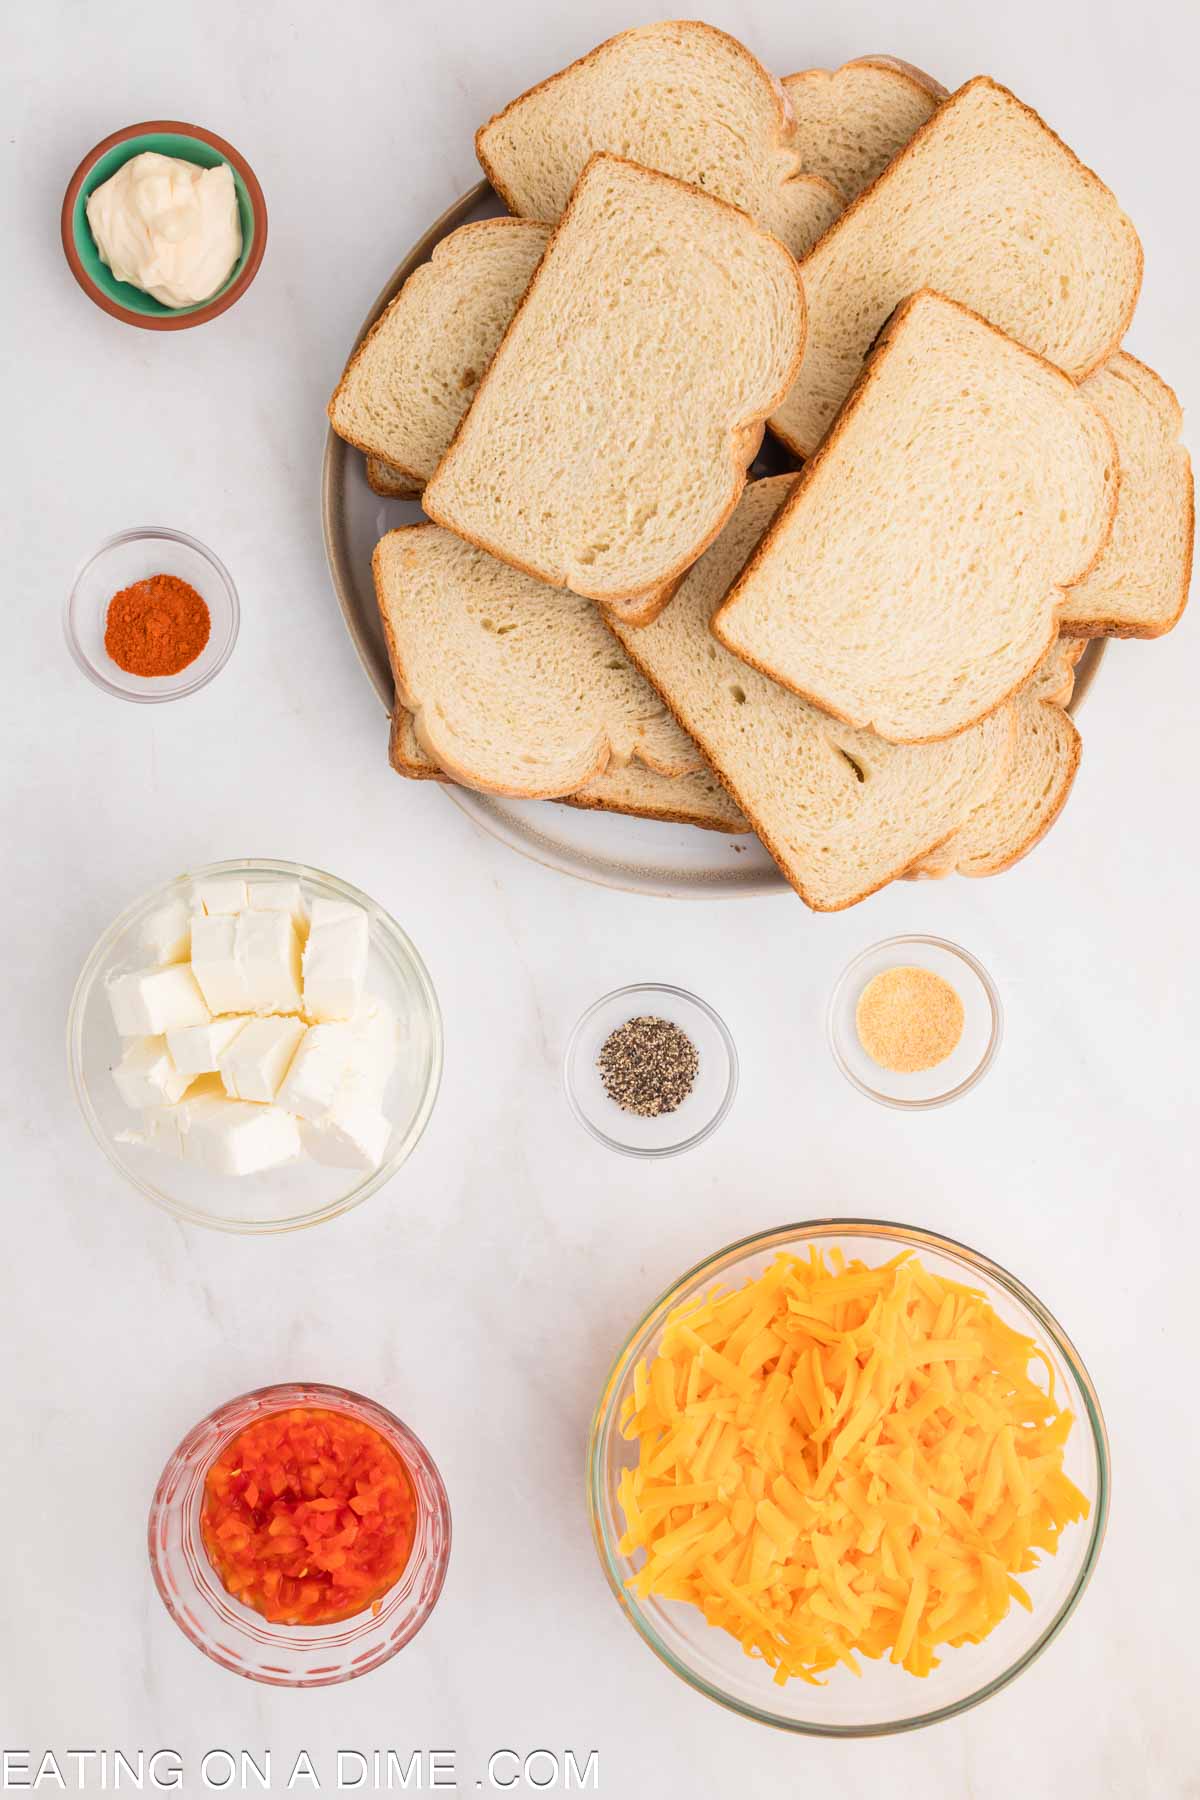 Pimento Cheese Sandwich Ingredients - cheese, cream cheese, pimento peppers, mayonnaise, garlic powder, cayenne pepper, pepper, white bread